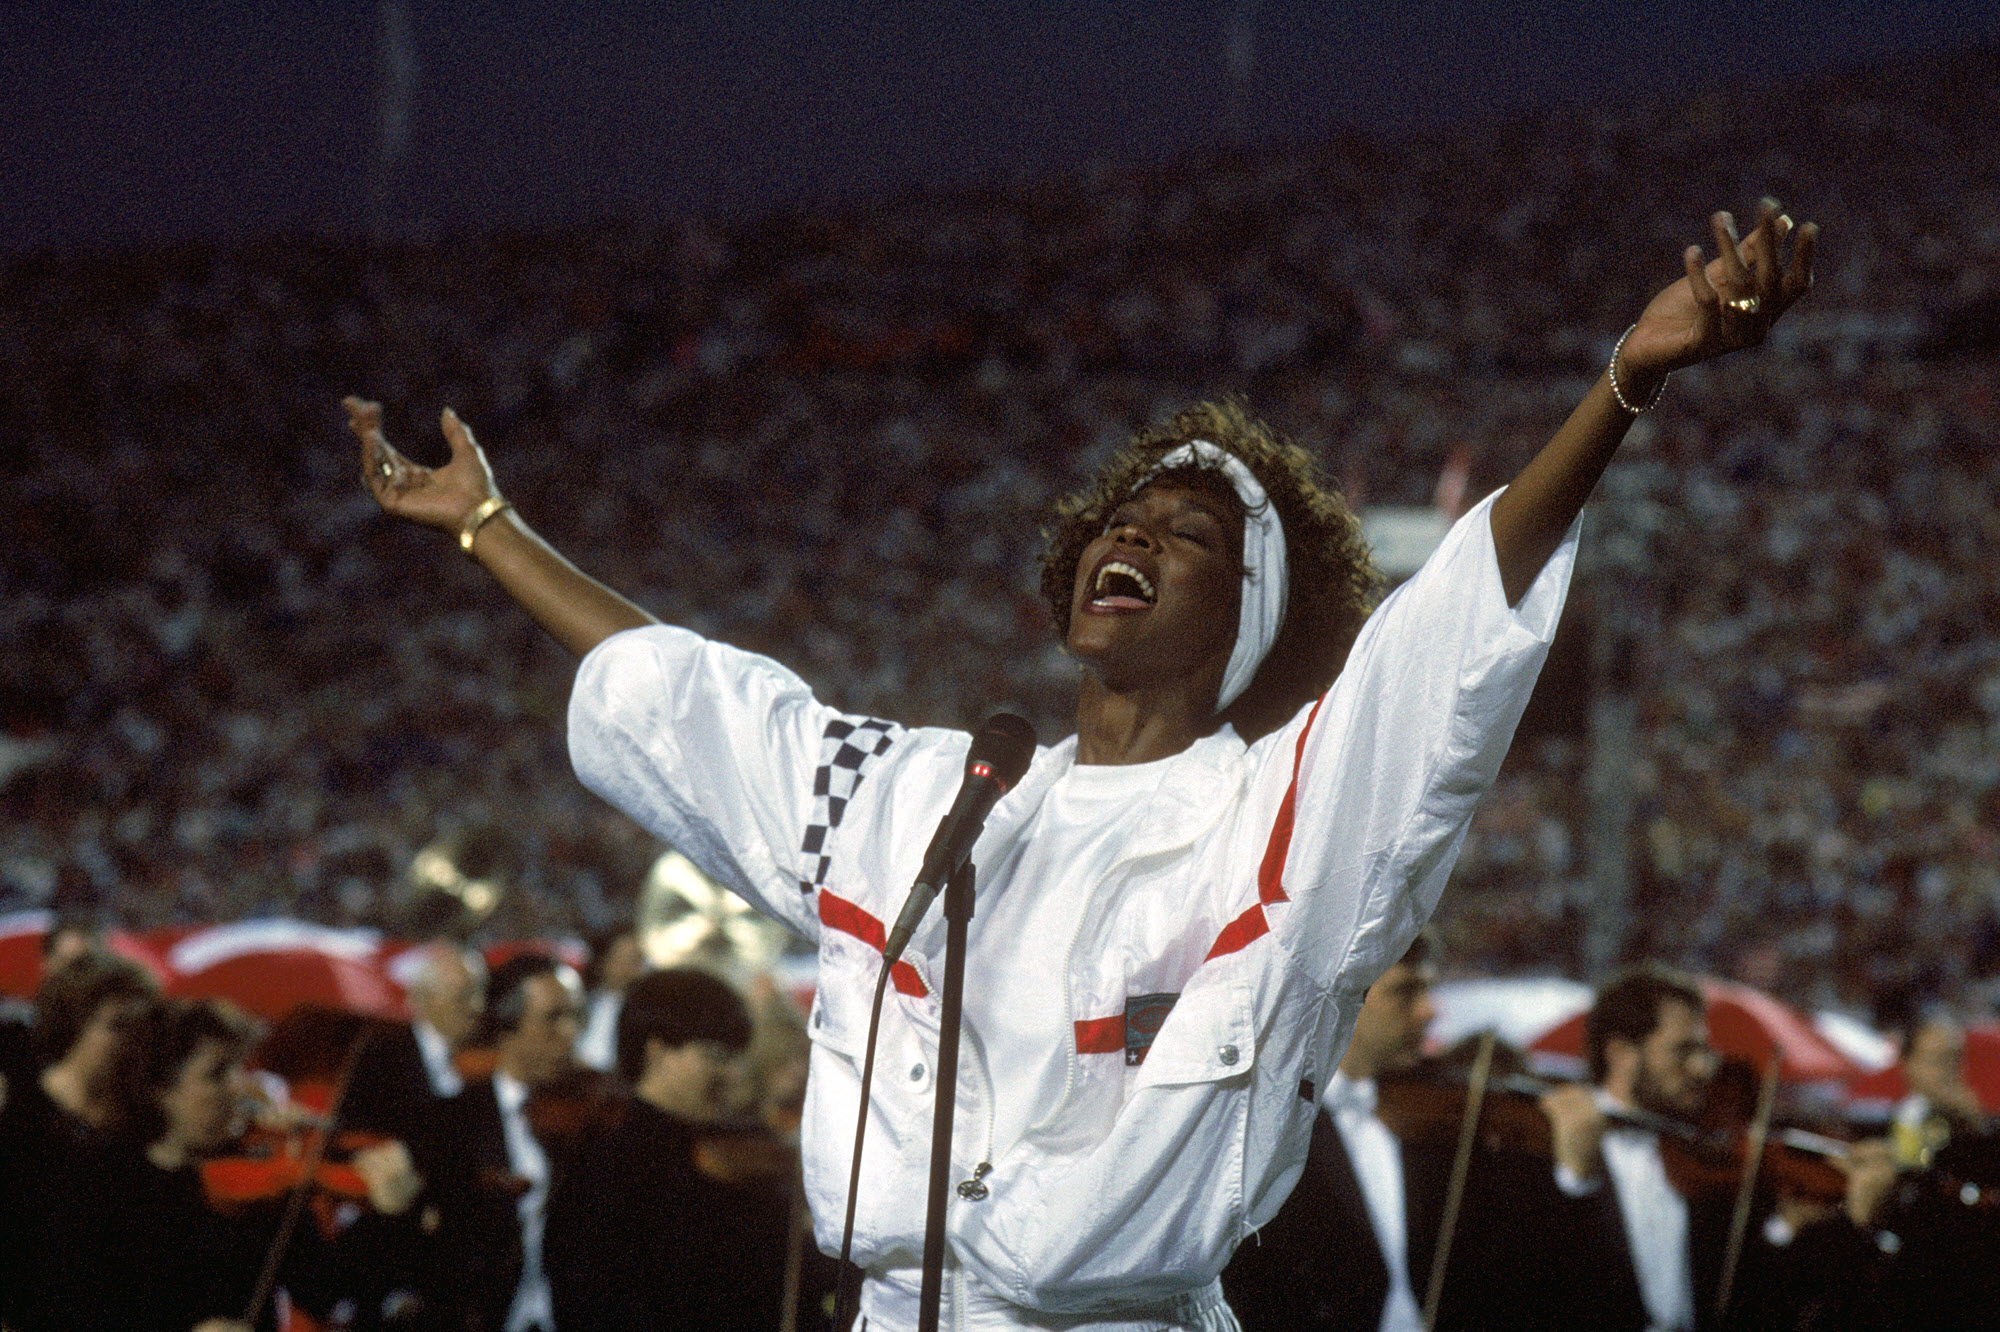 Whitney Houston's Super Bowl national anthem will never be topped